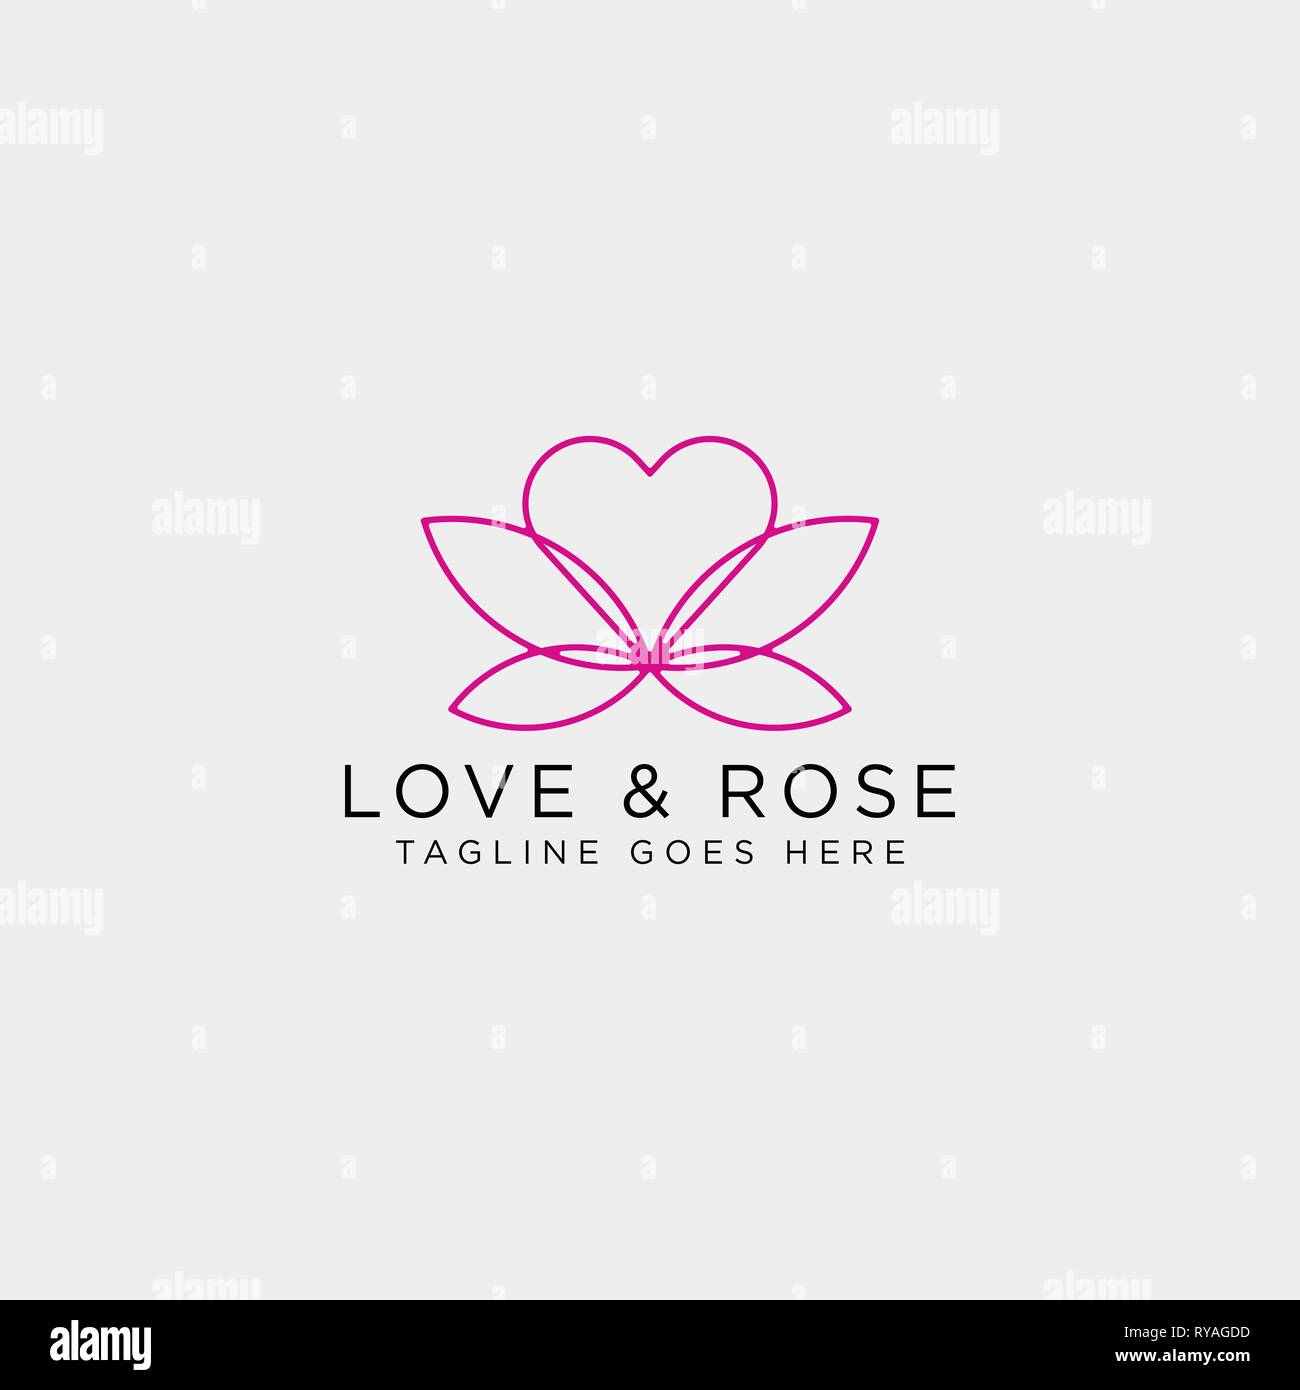 Love Rose Nature logo template vector illustration icon element isolated Stock Vector